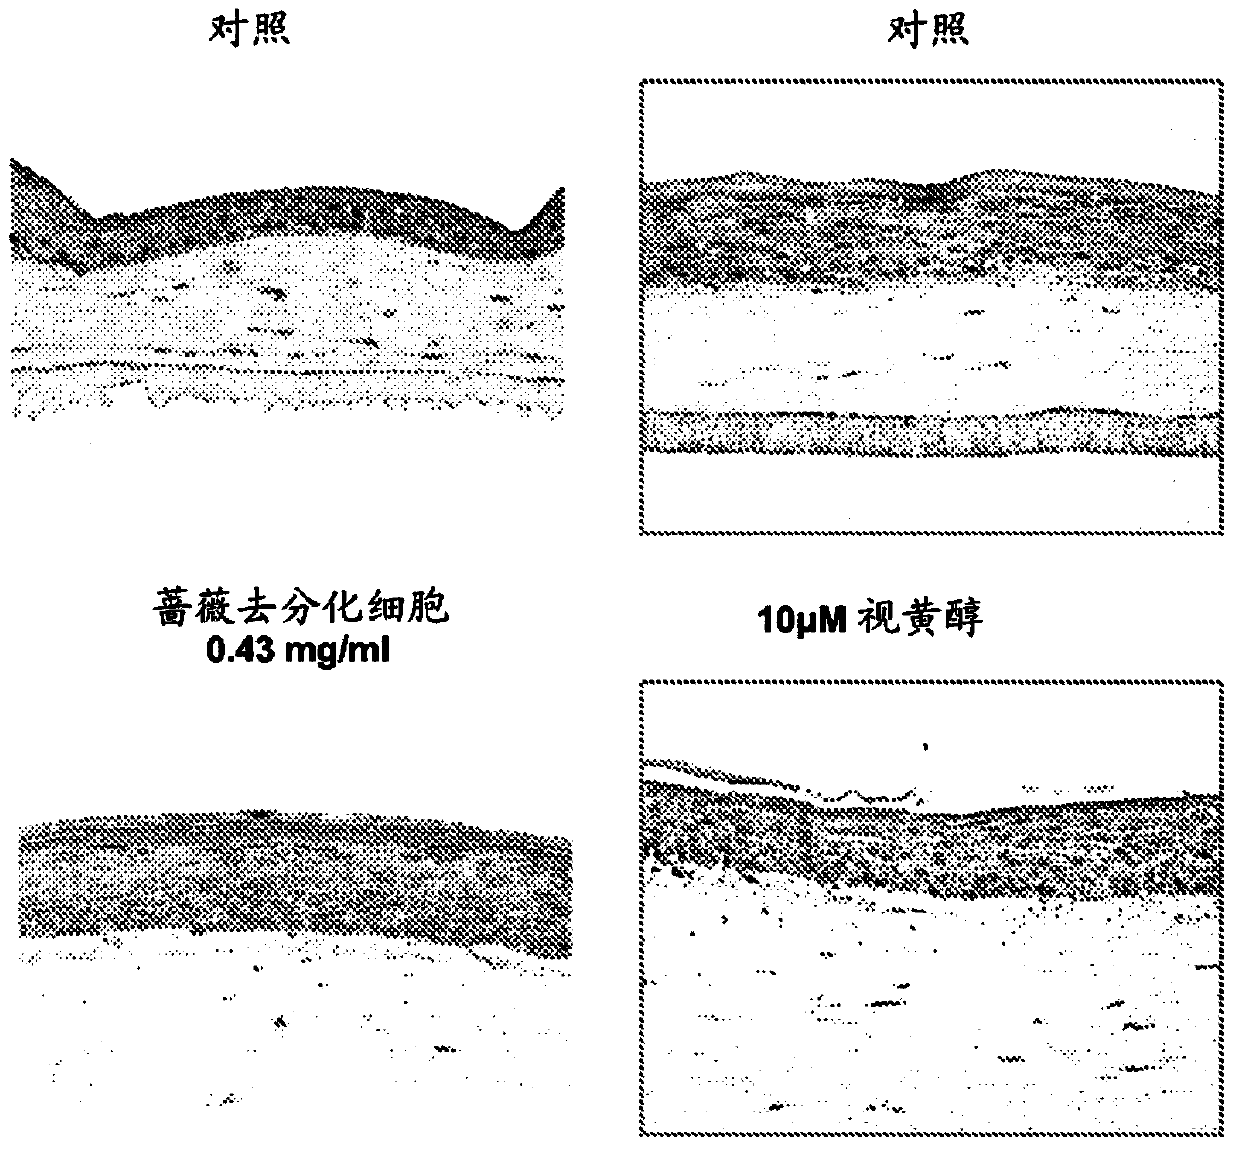 Cosmetic uses of dedifferentiated plant cells